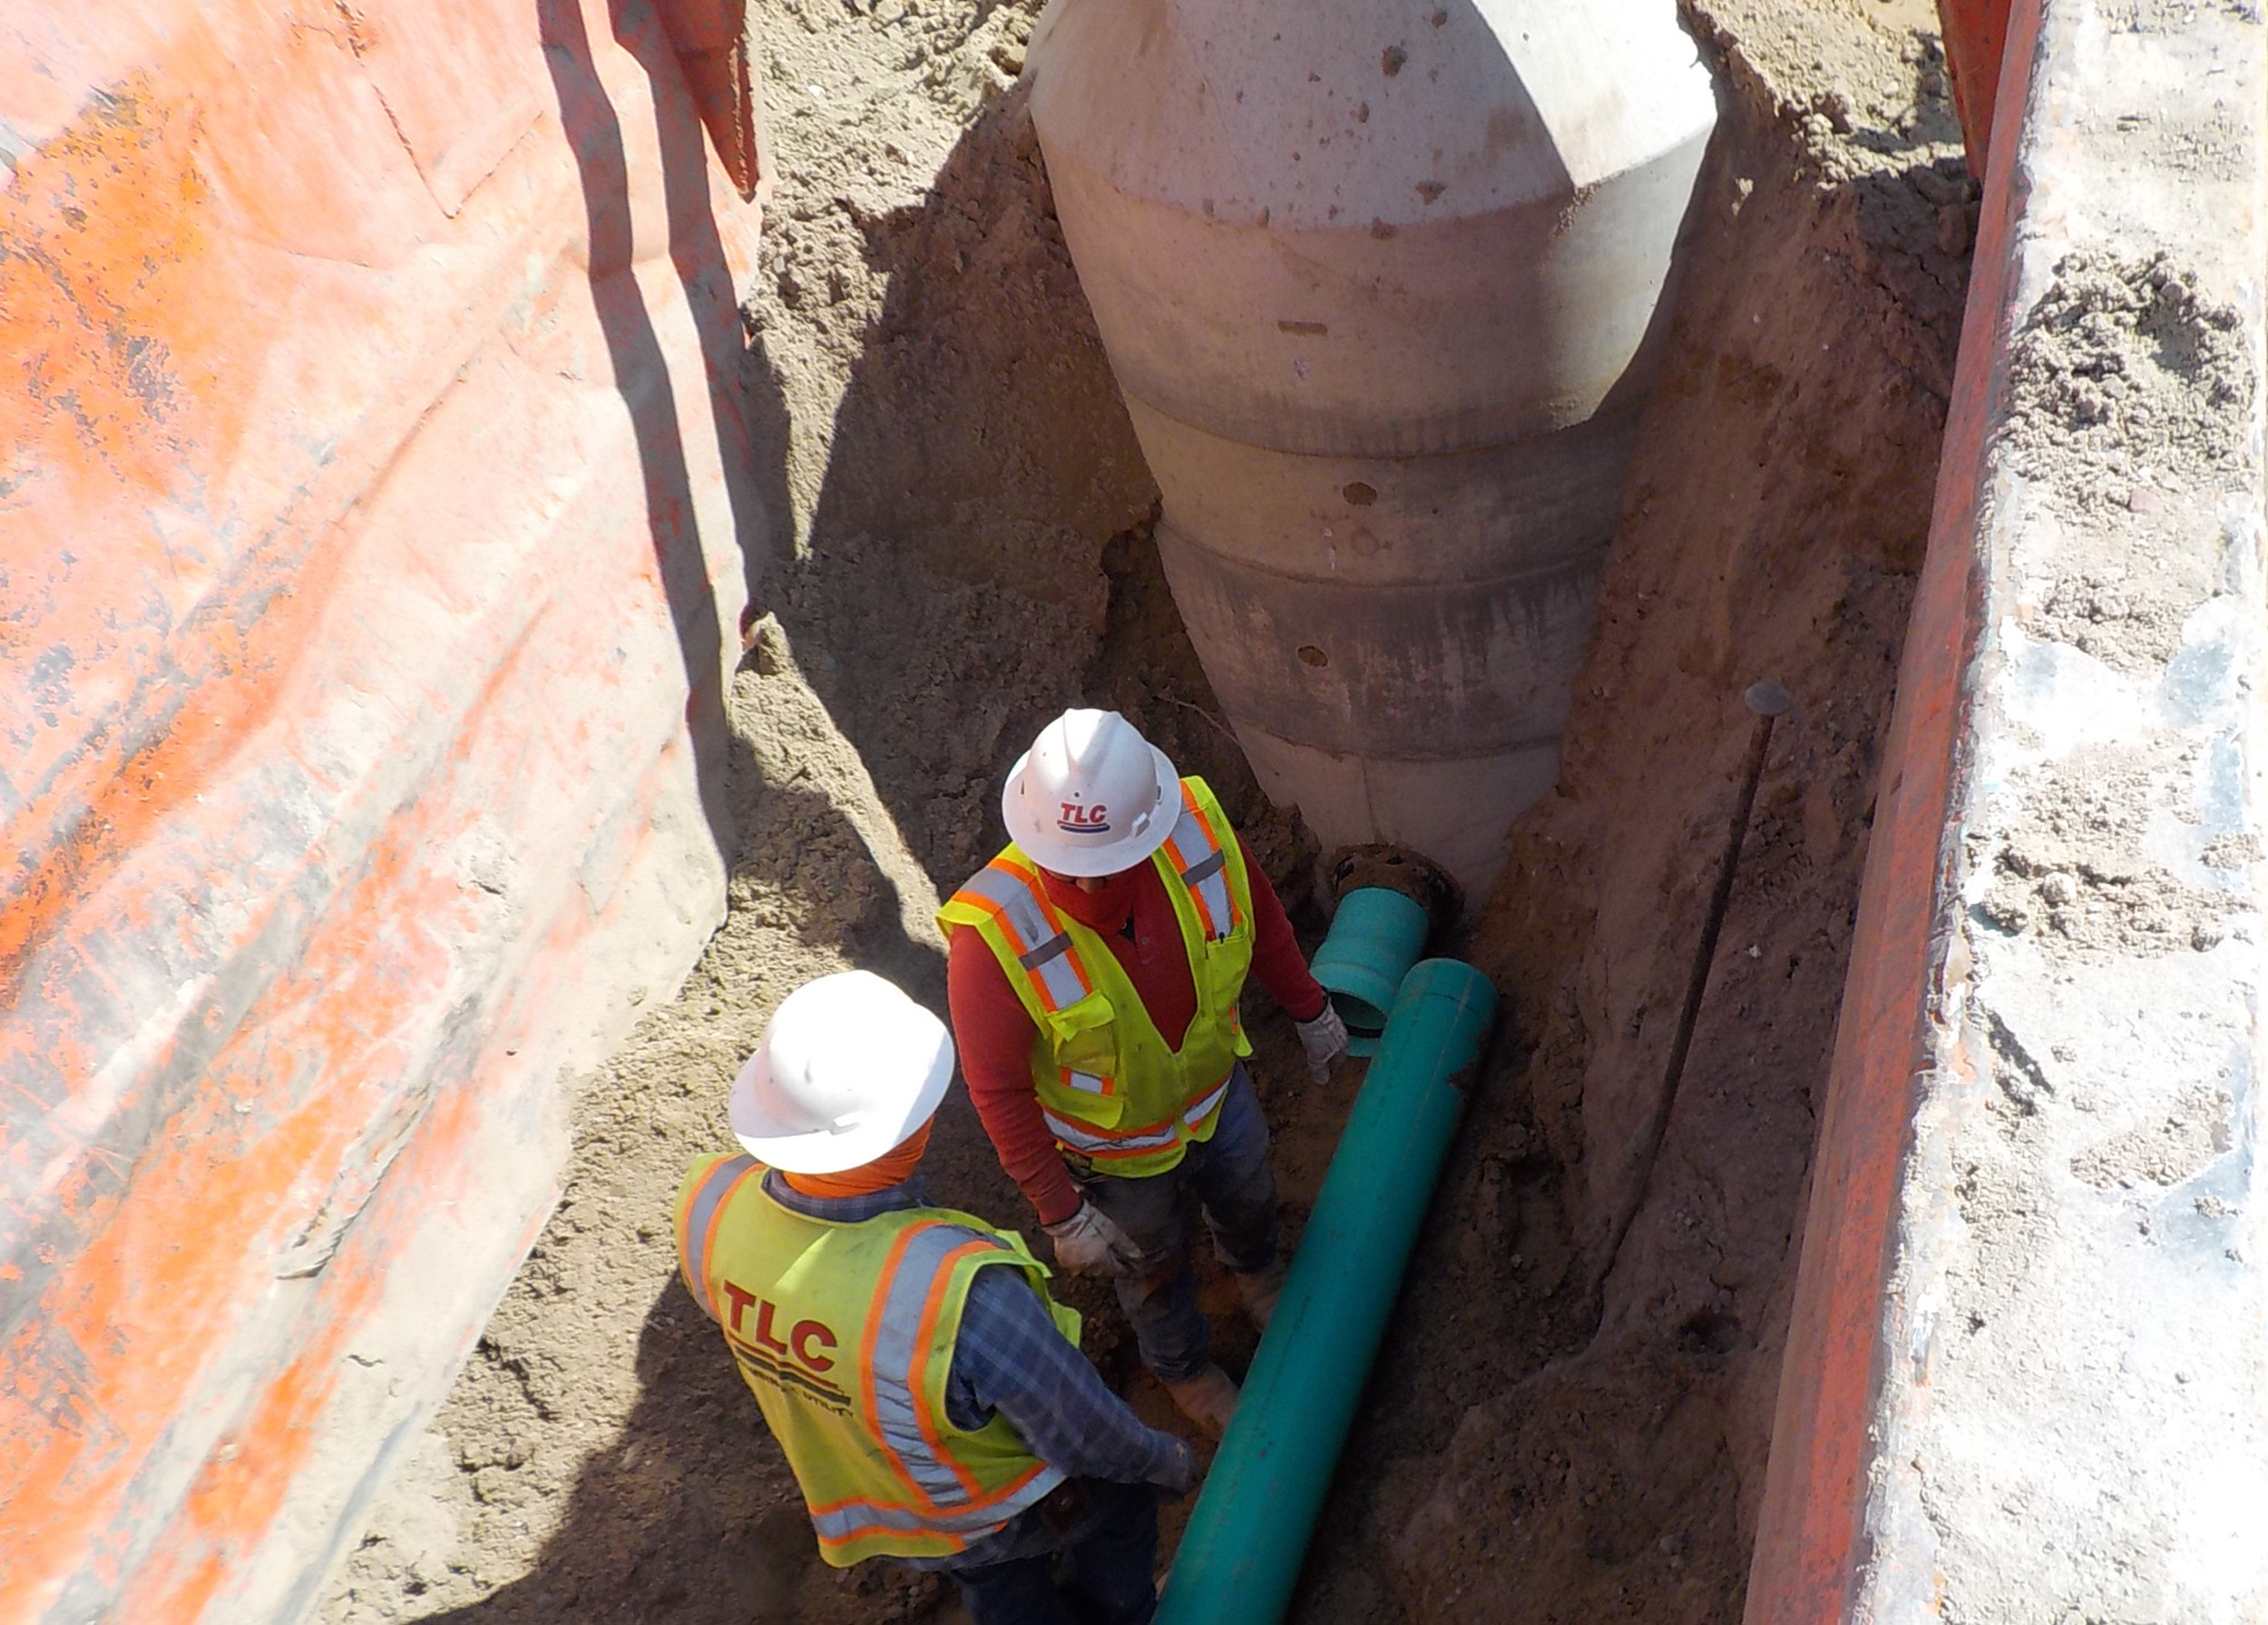 Water service lines were routed down to the RV pad sites with T connections at each pad location, allowing multiple pad sites to be serviced from a single tap off the mainline.